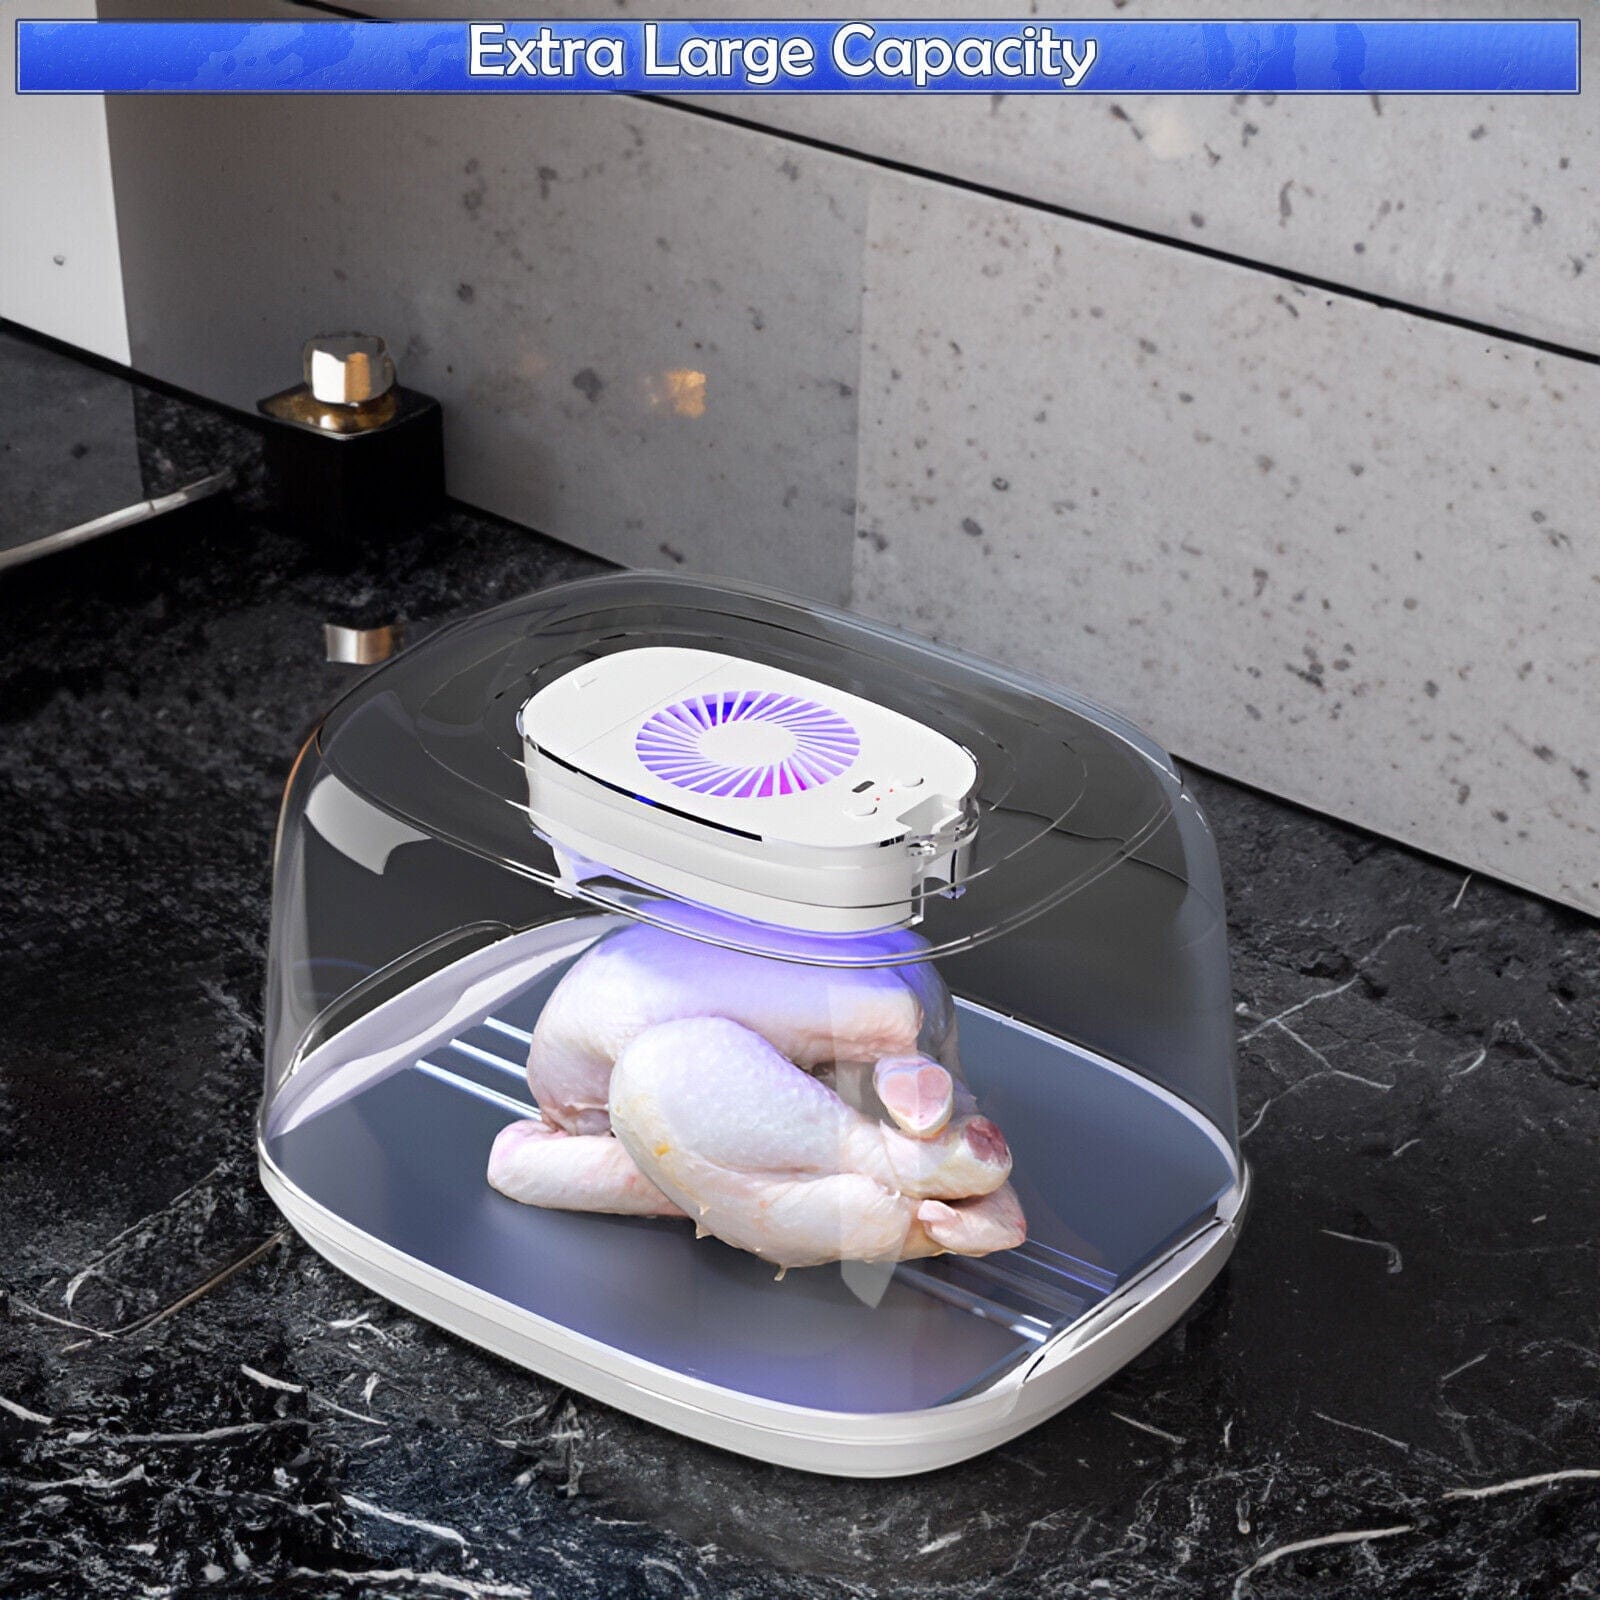 3-in-1 Defrosting Tray Box with UV Light, Fan & Atomizer - Large Quick Meat Thawing Solution